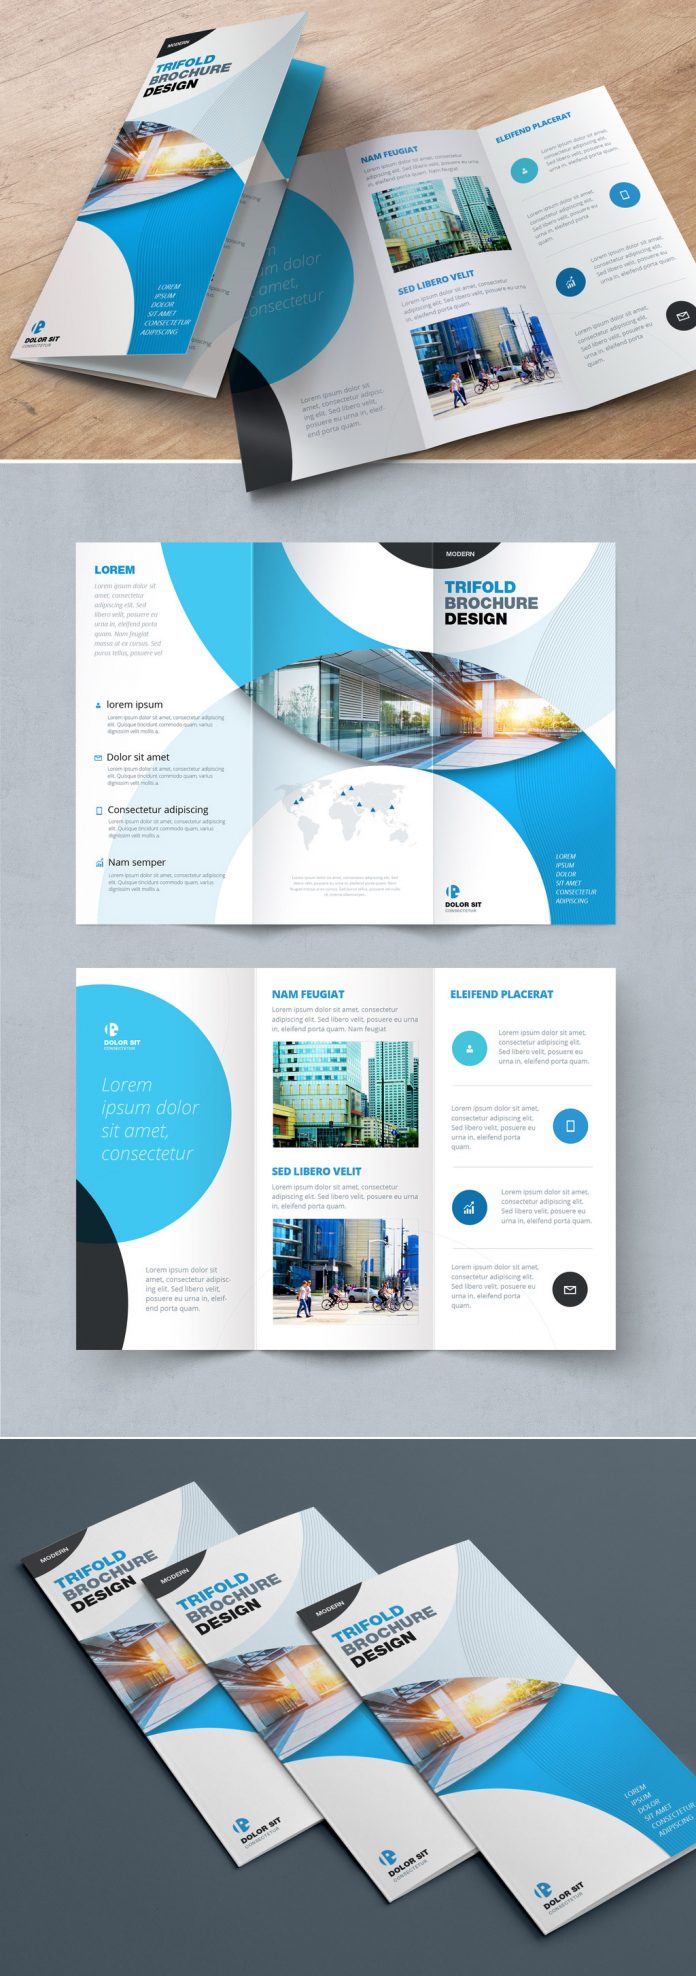 Blue Trifold InDesign Brochure Template with Circles Regarding Adobe Indesign Tri Fold Brochure Template